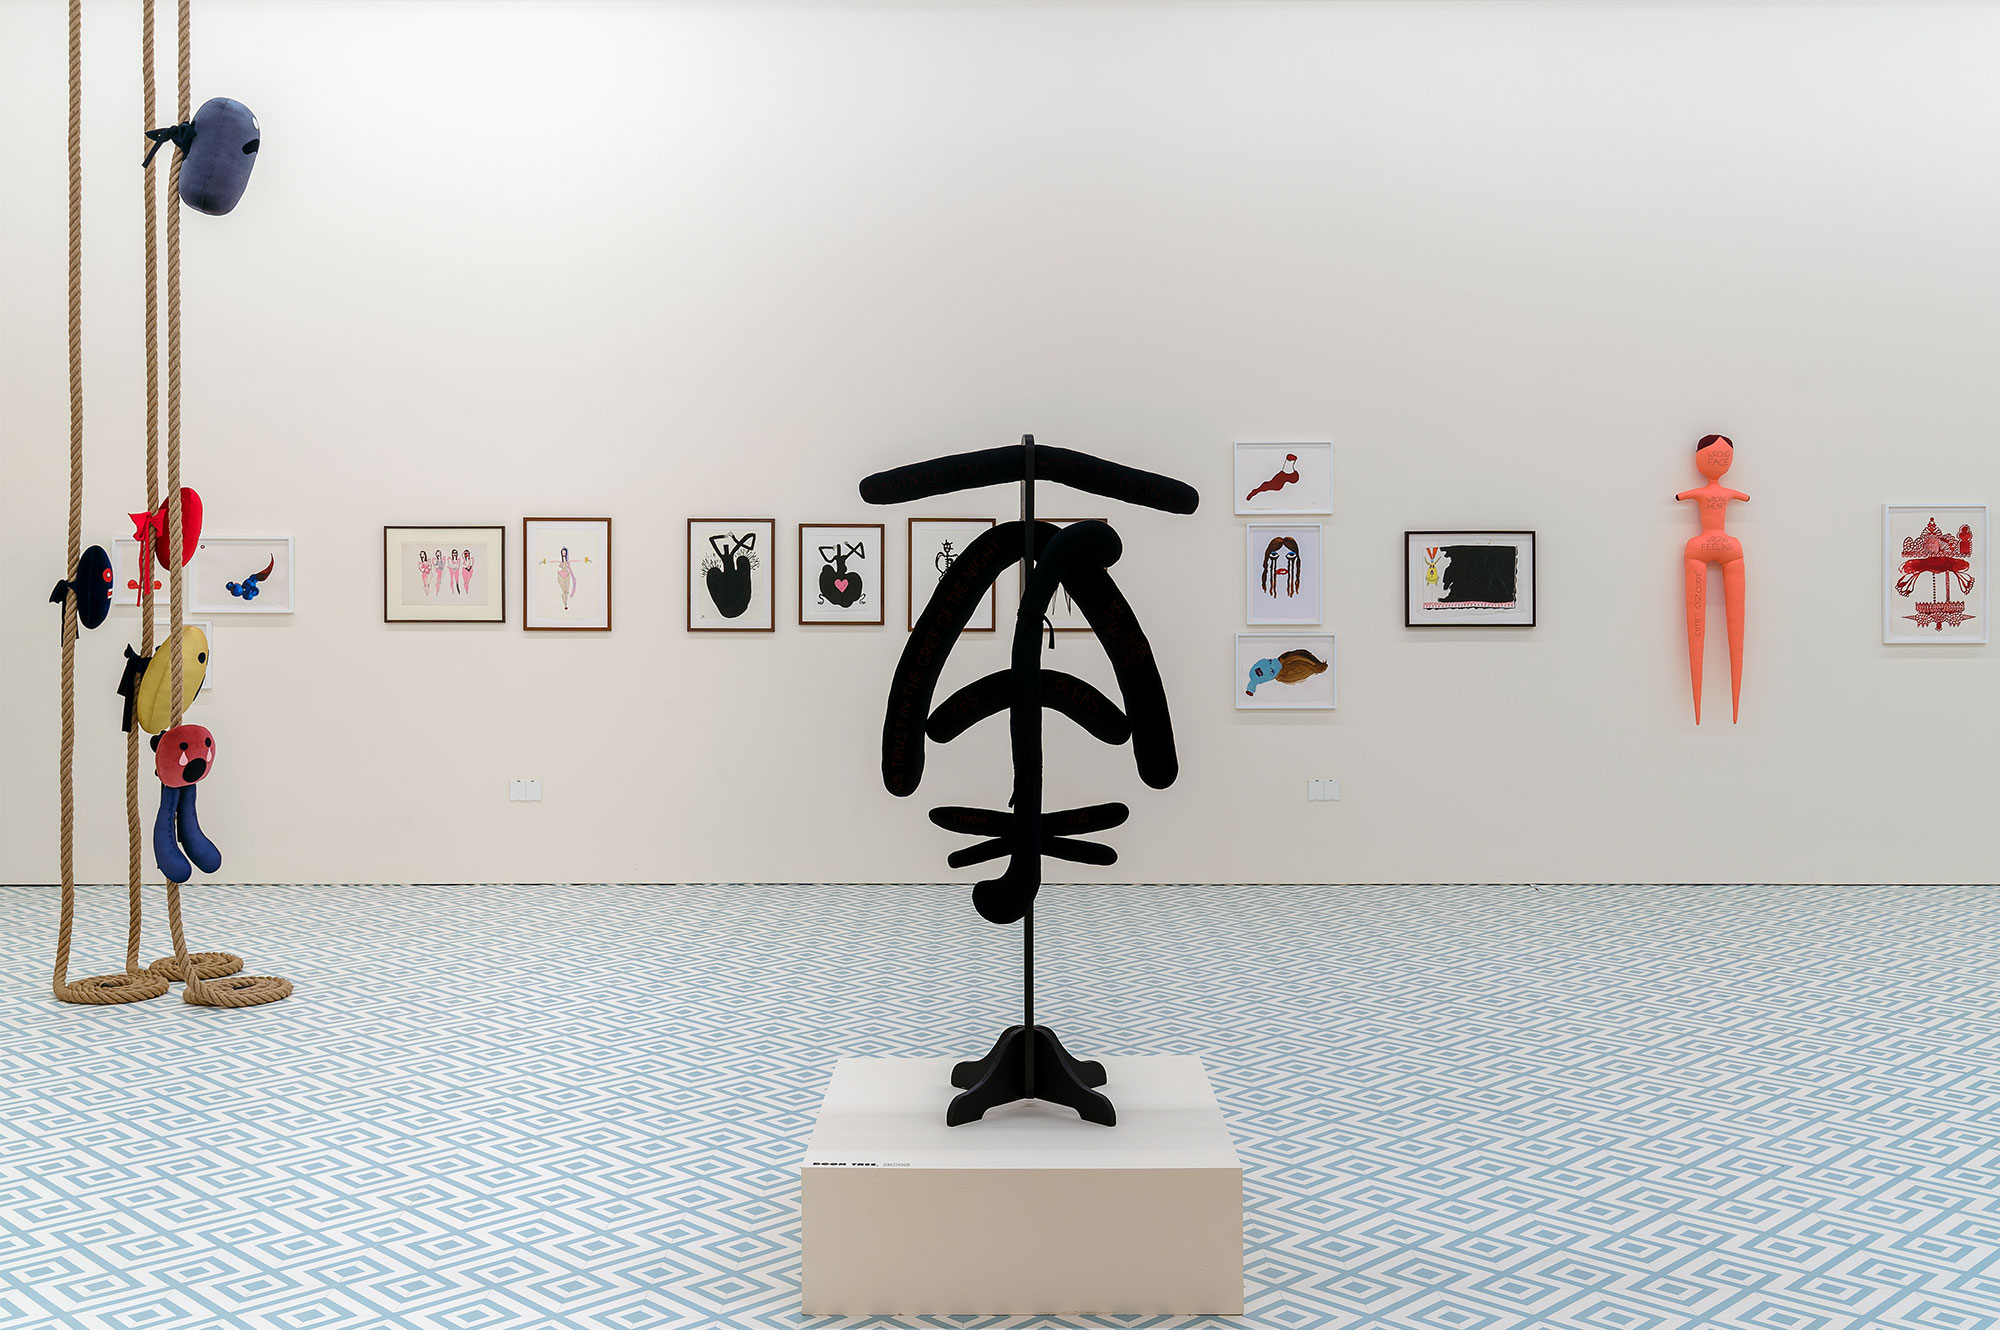 A 'tree' of black fabric limbs on a short plinth. On the left, five felt objects hang from three thick ropes hung from the ceiling.